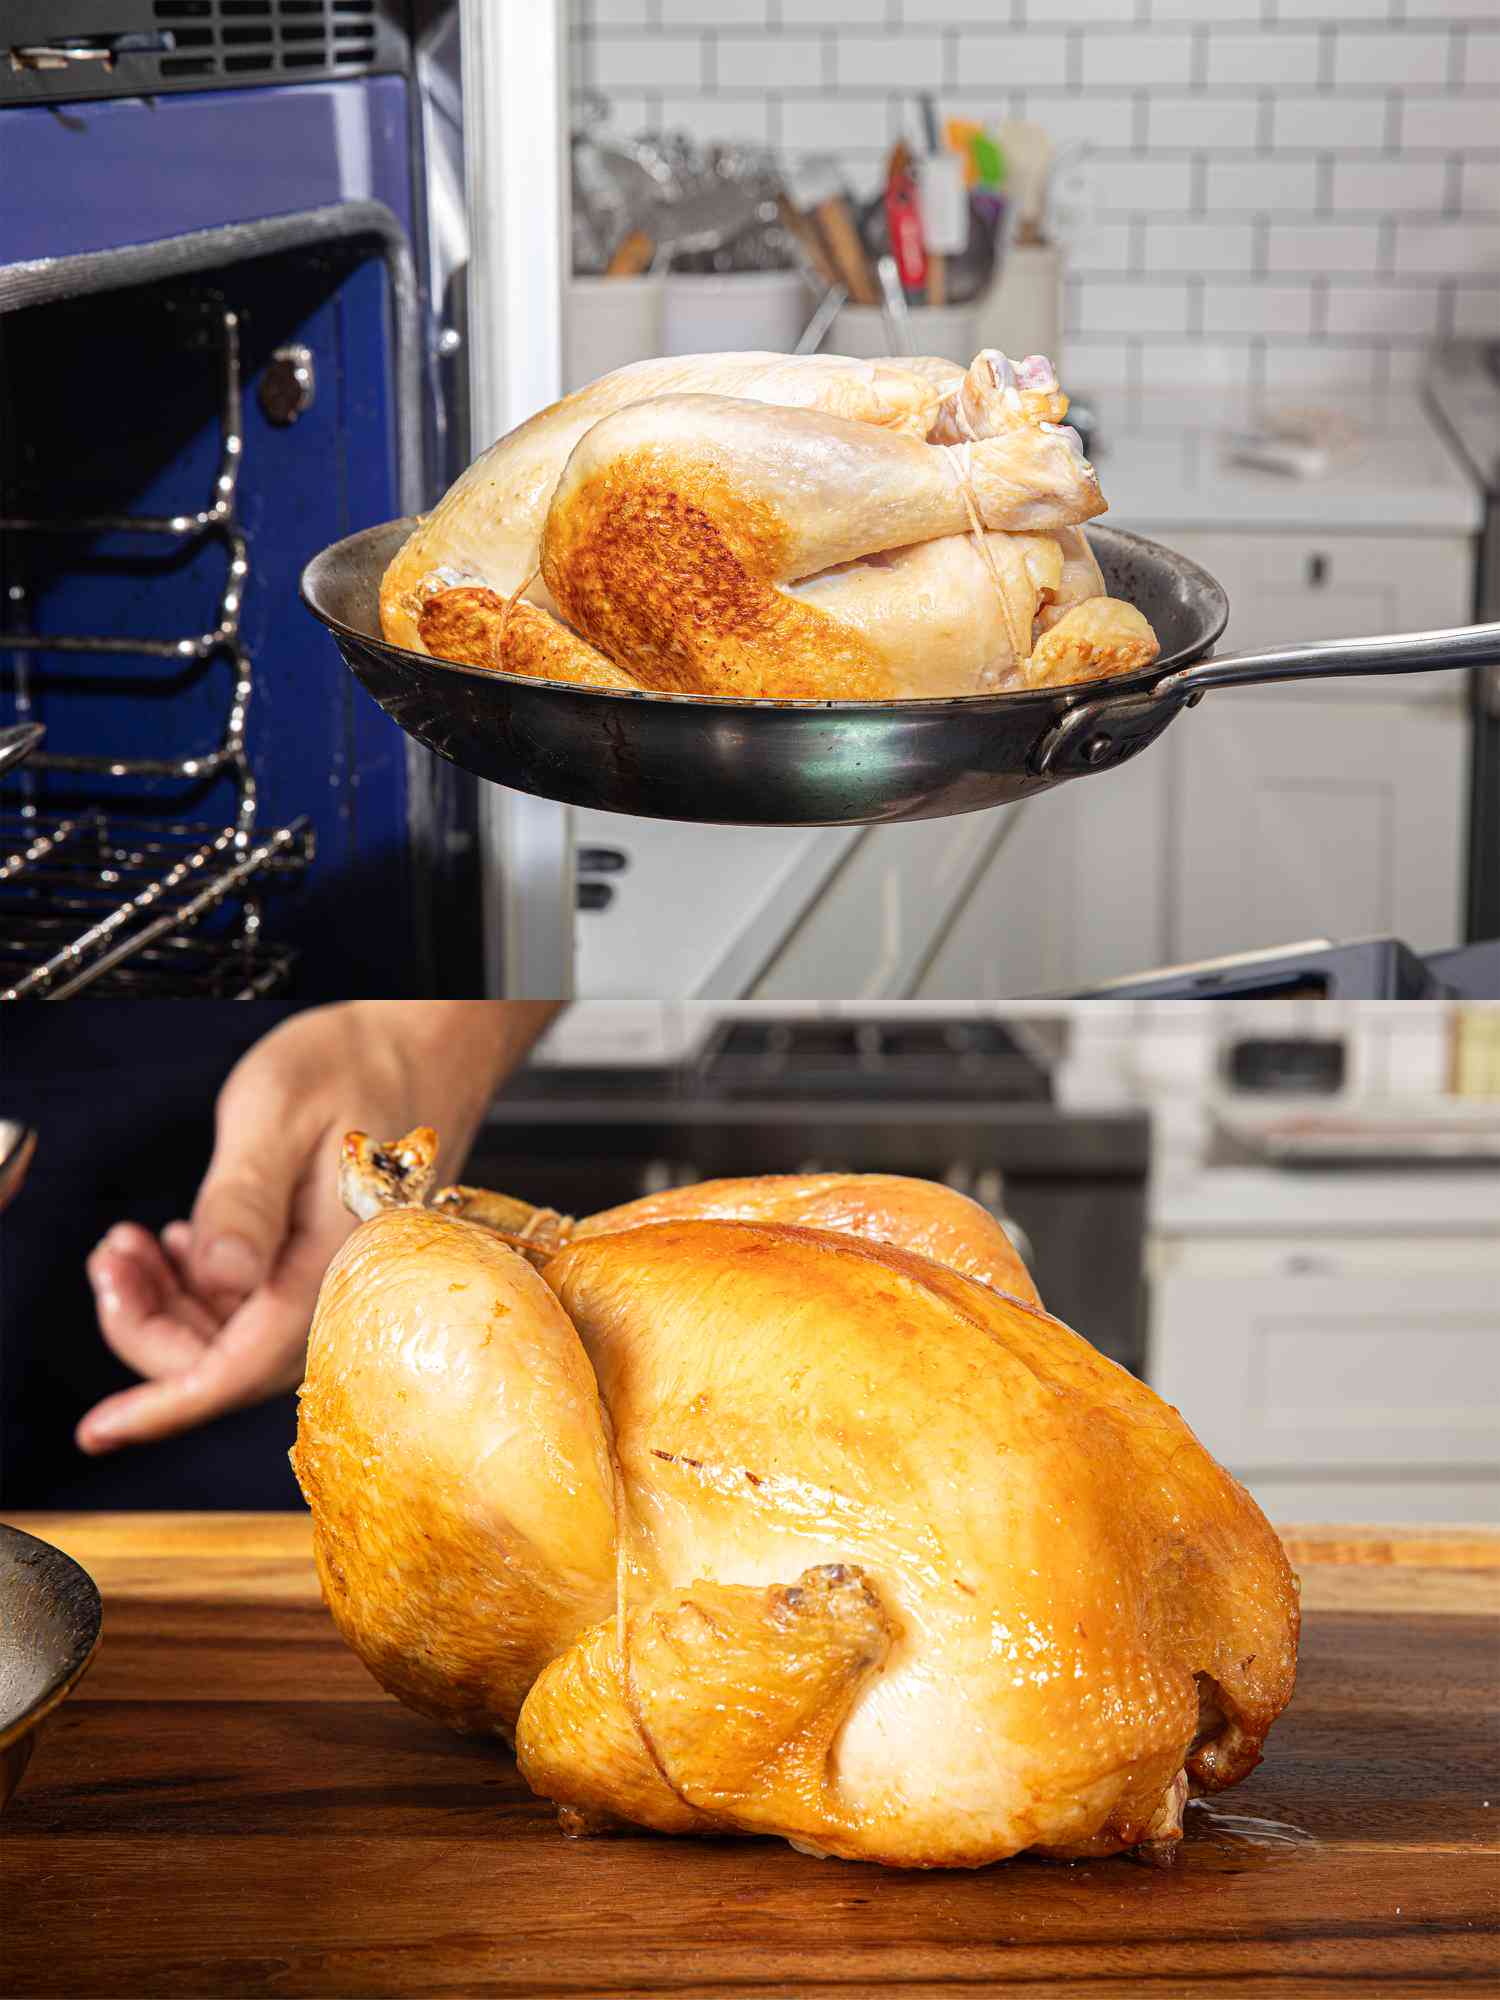 Two image collage of putting a chicken into the oven and it on a cutting board after being roasted